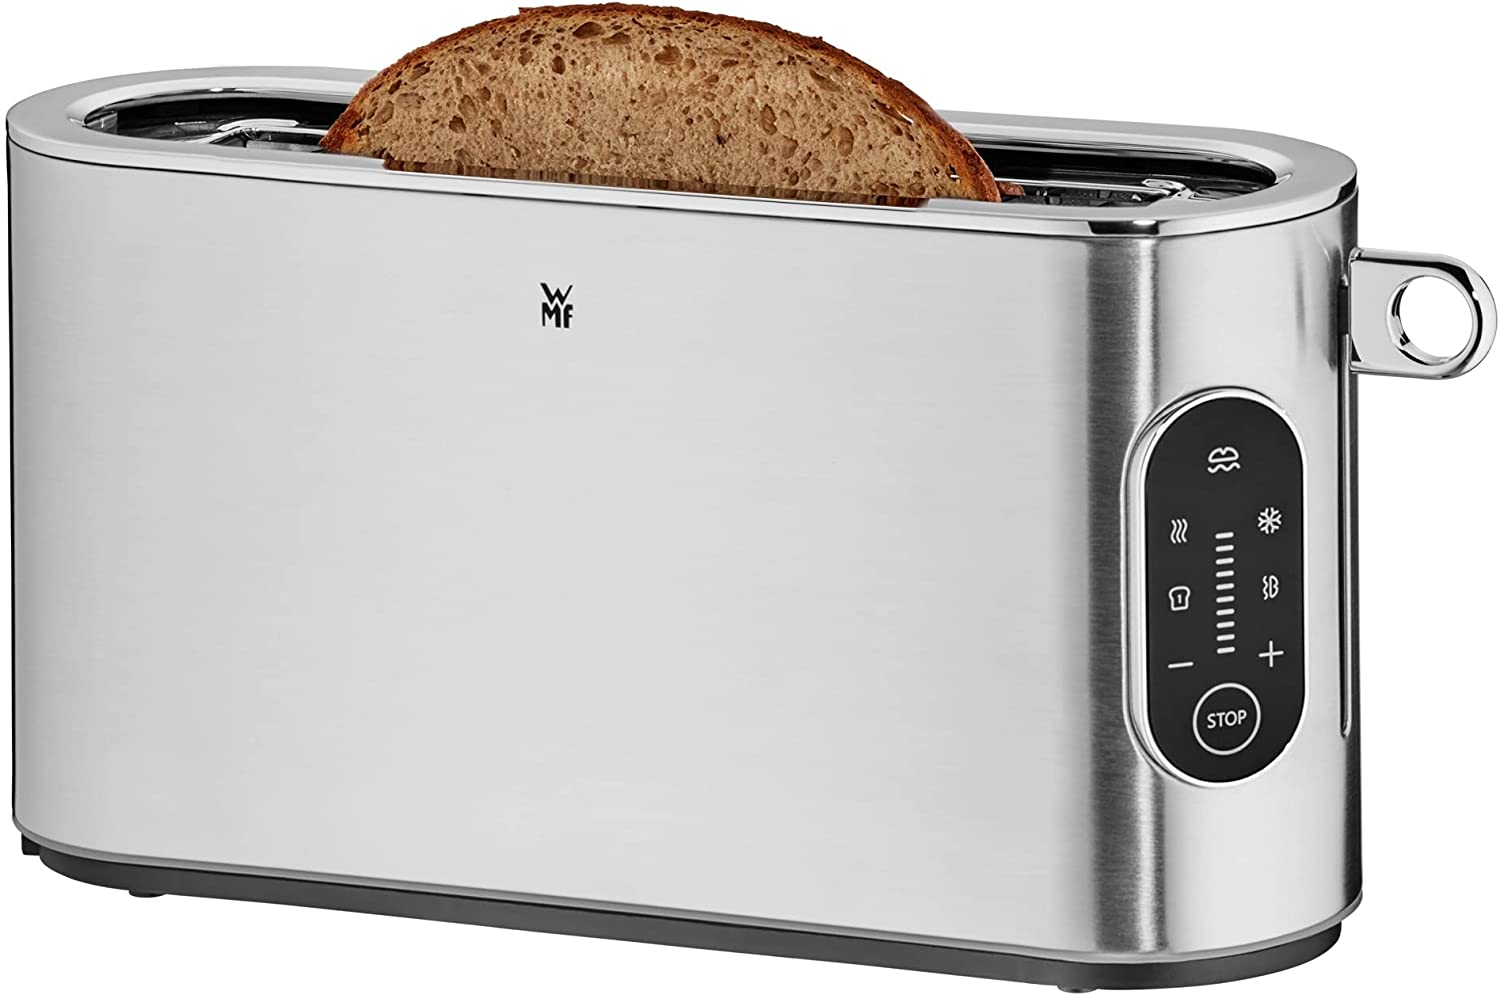 WMF Lumero Toaster Long Slot with Bread Attachment, 2 Slices, XXL, One-Sided Toast, 1 Slice Button, 10 Browning Levels, Toaster Stainless Steel Matt